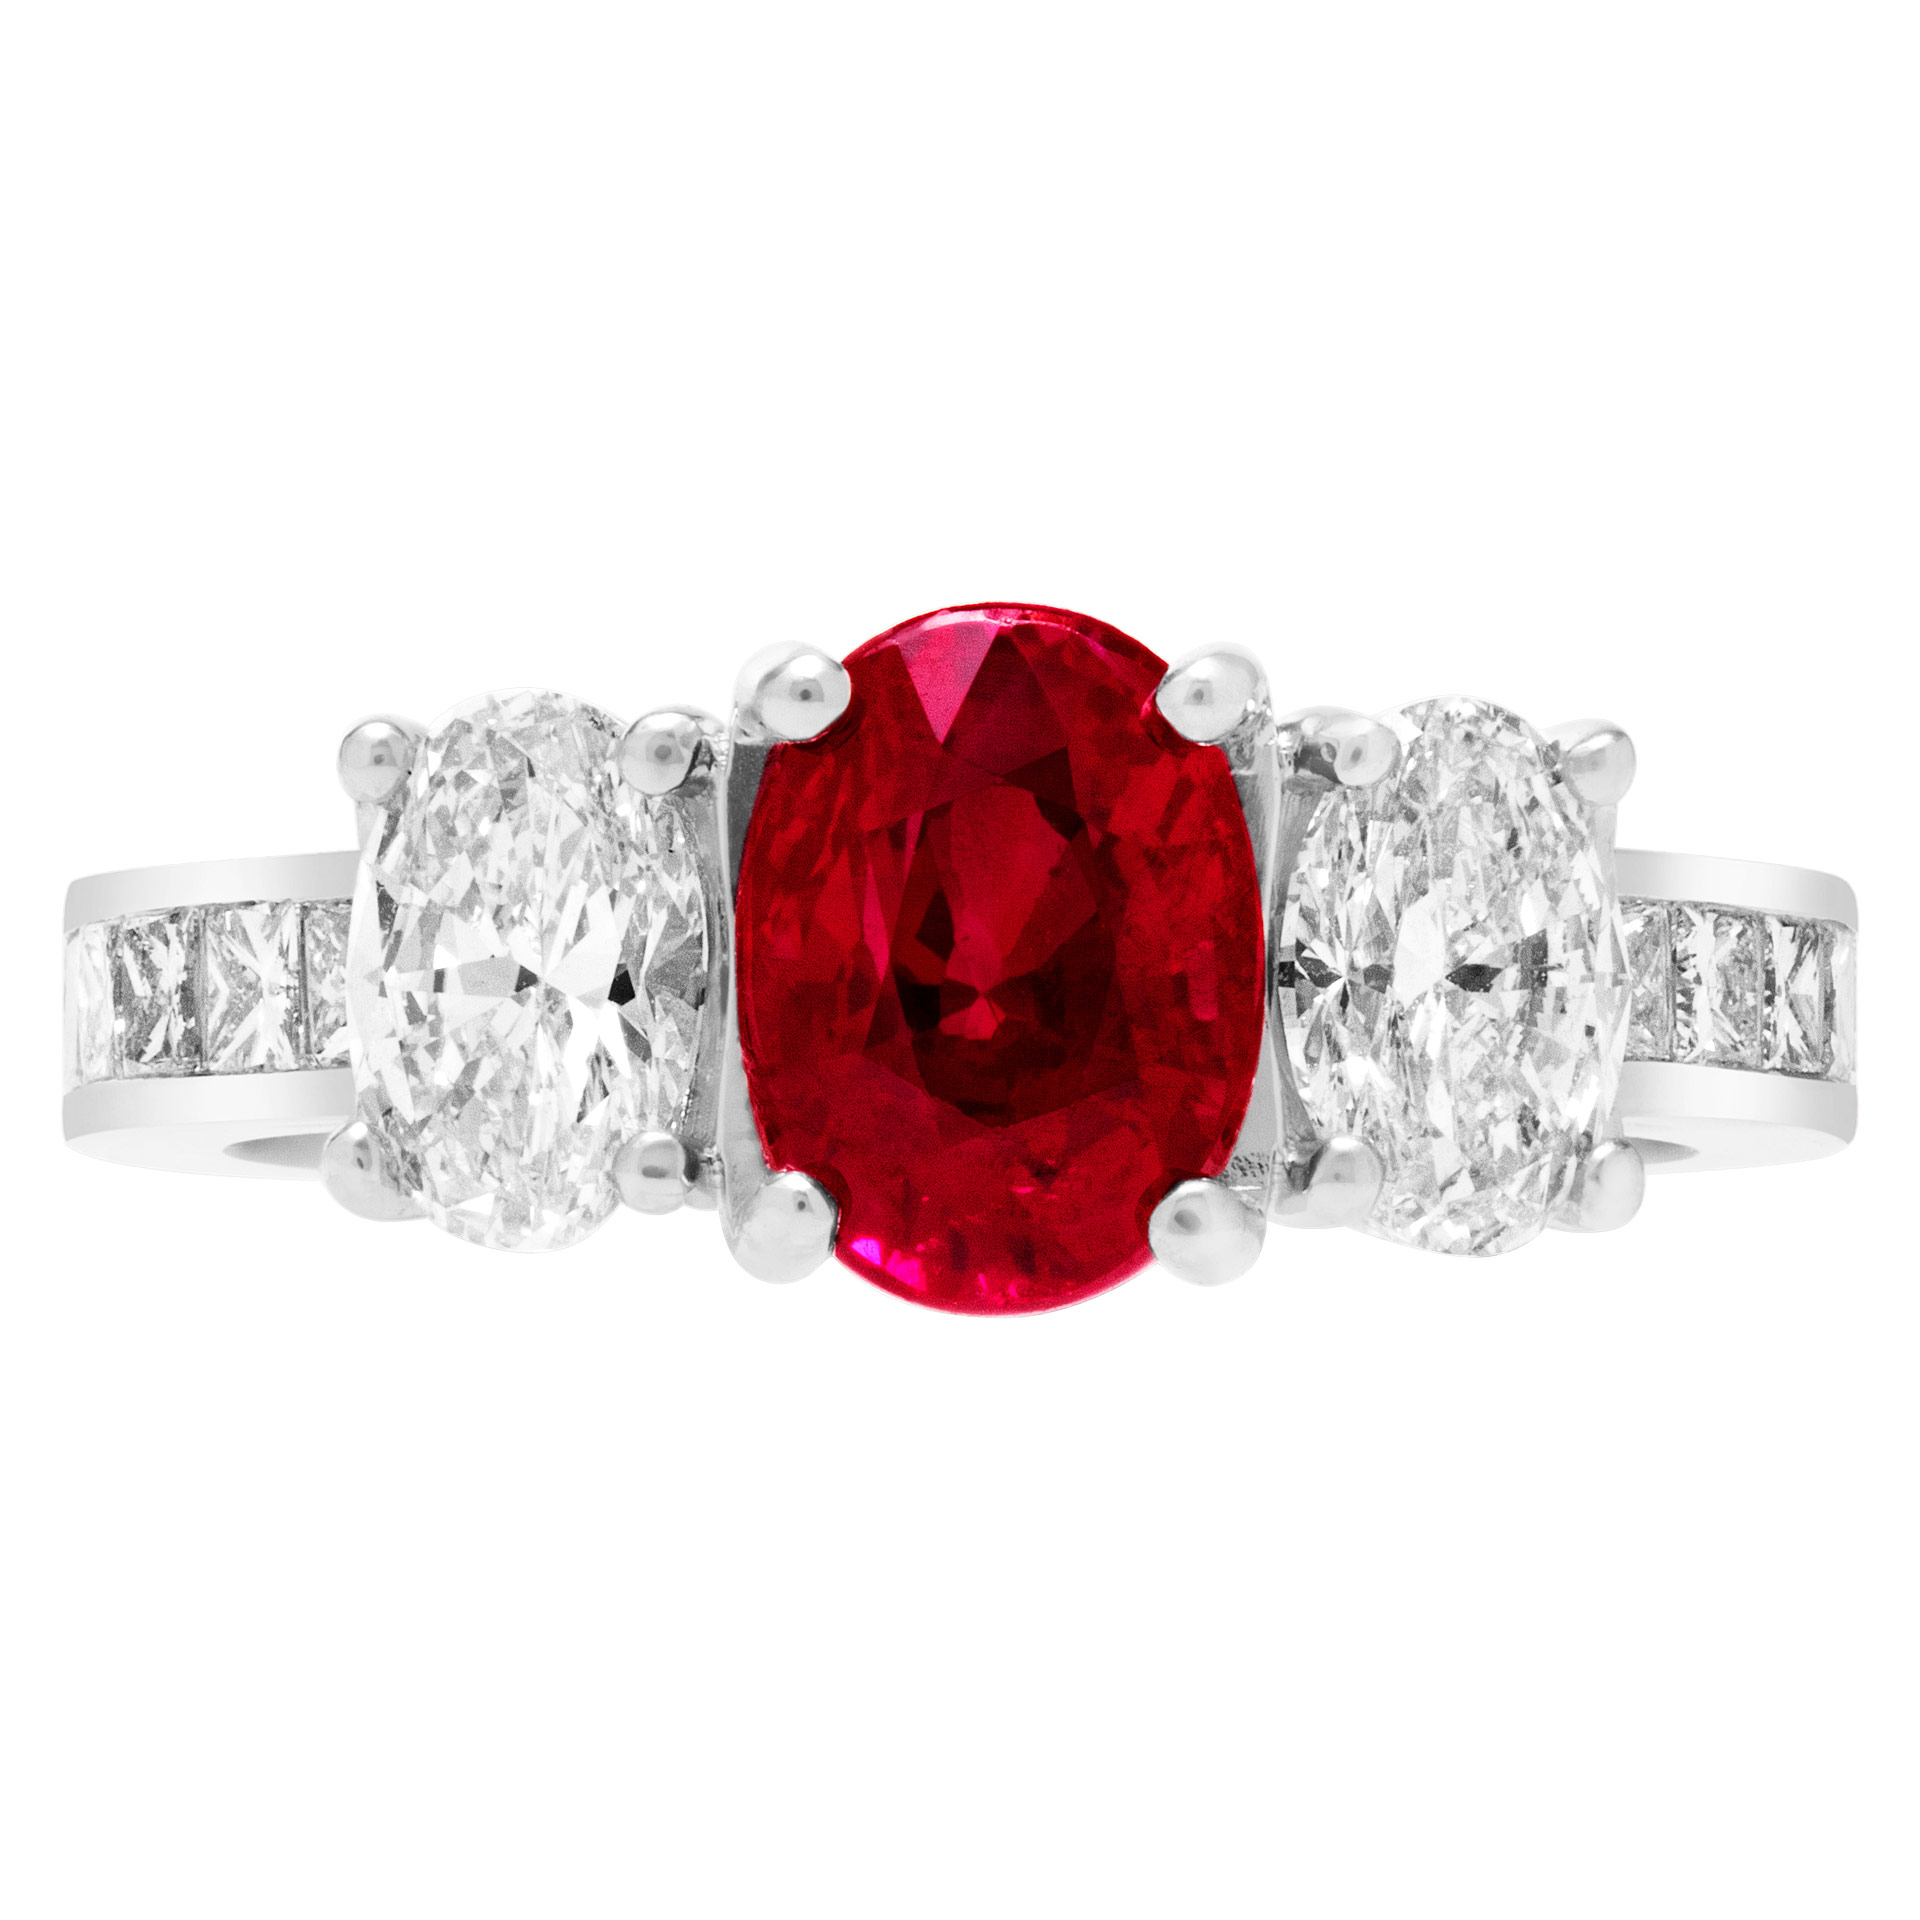 GIA certified ruby & diamond ring with 2 cts Burma ruby & two 0.50 ct oval dia & princess cut dia